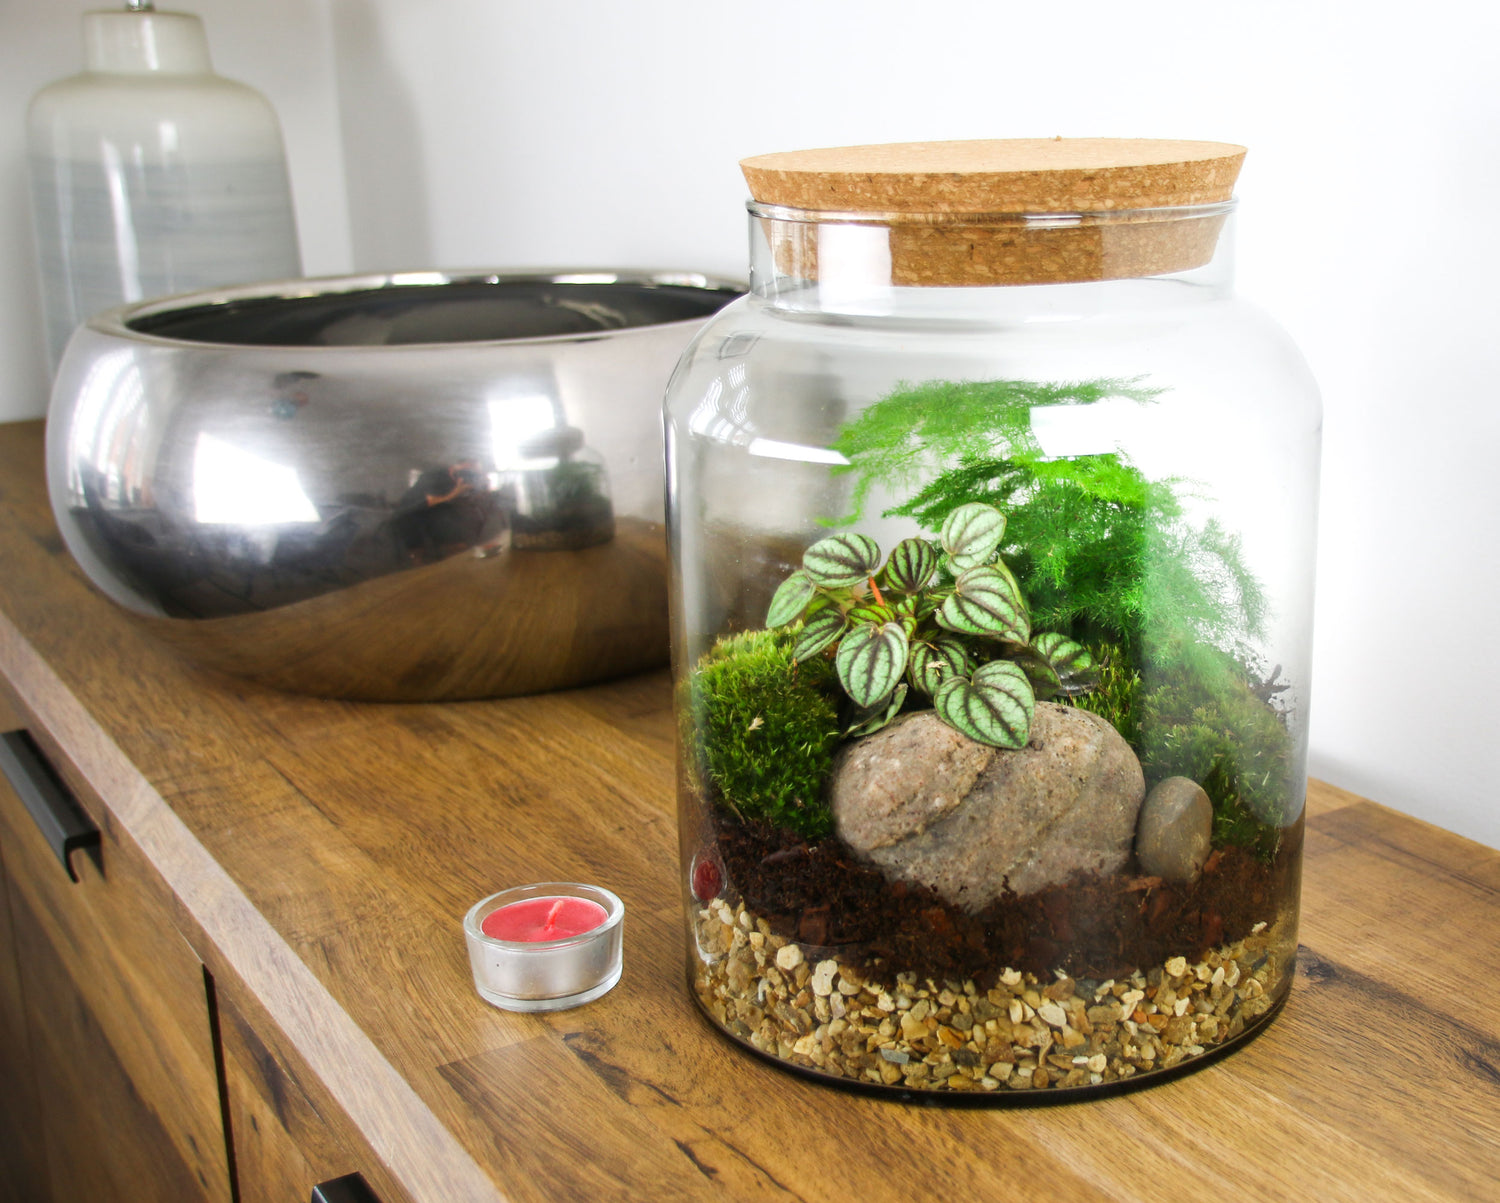 Glass terrarium kit with ball moss and living plants